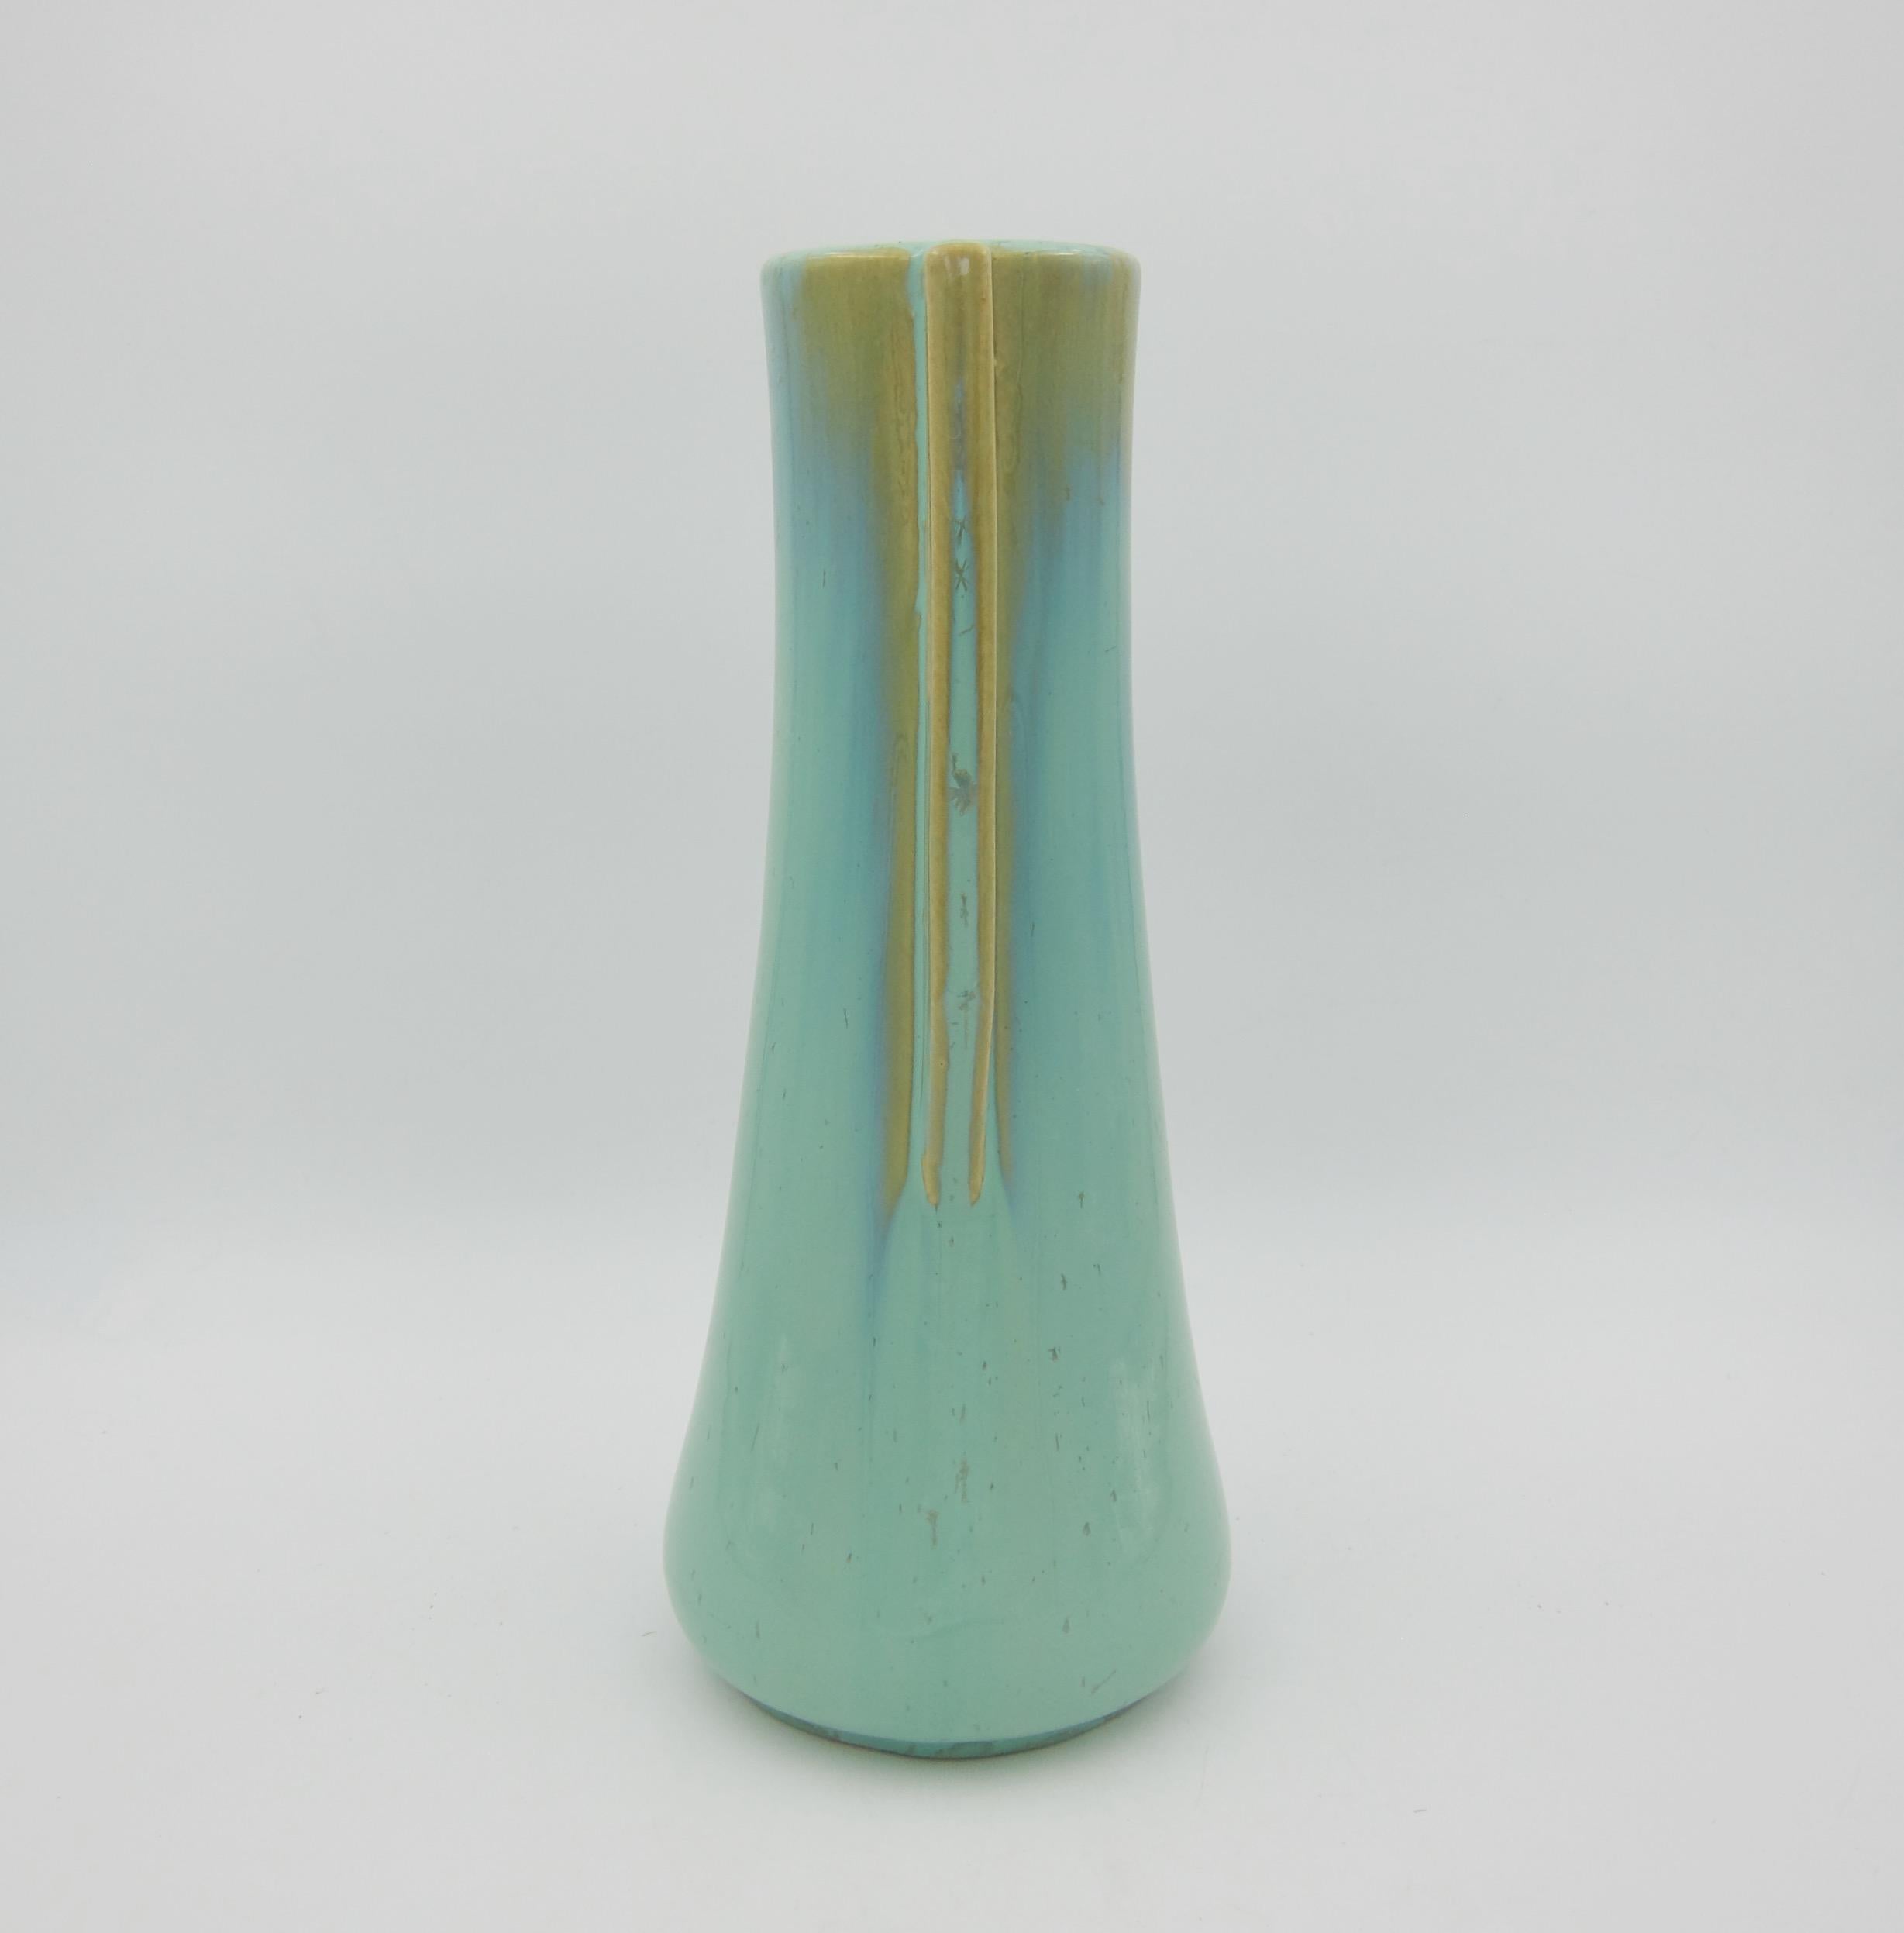 American Early 20th Century Fulper Pottery Double Handle Vase with a Green Flambe Glaze